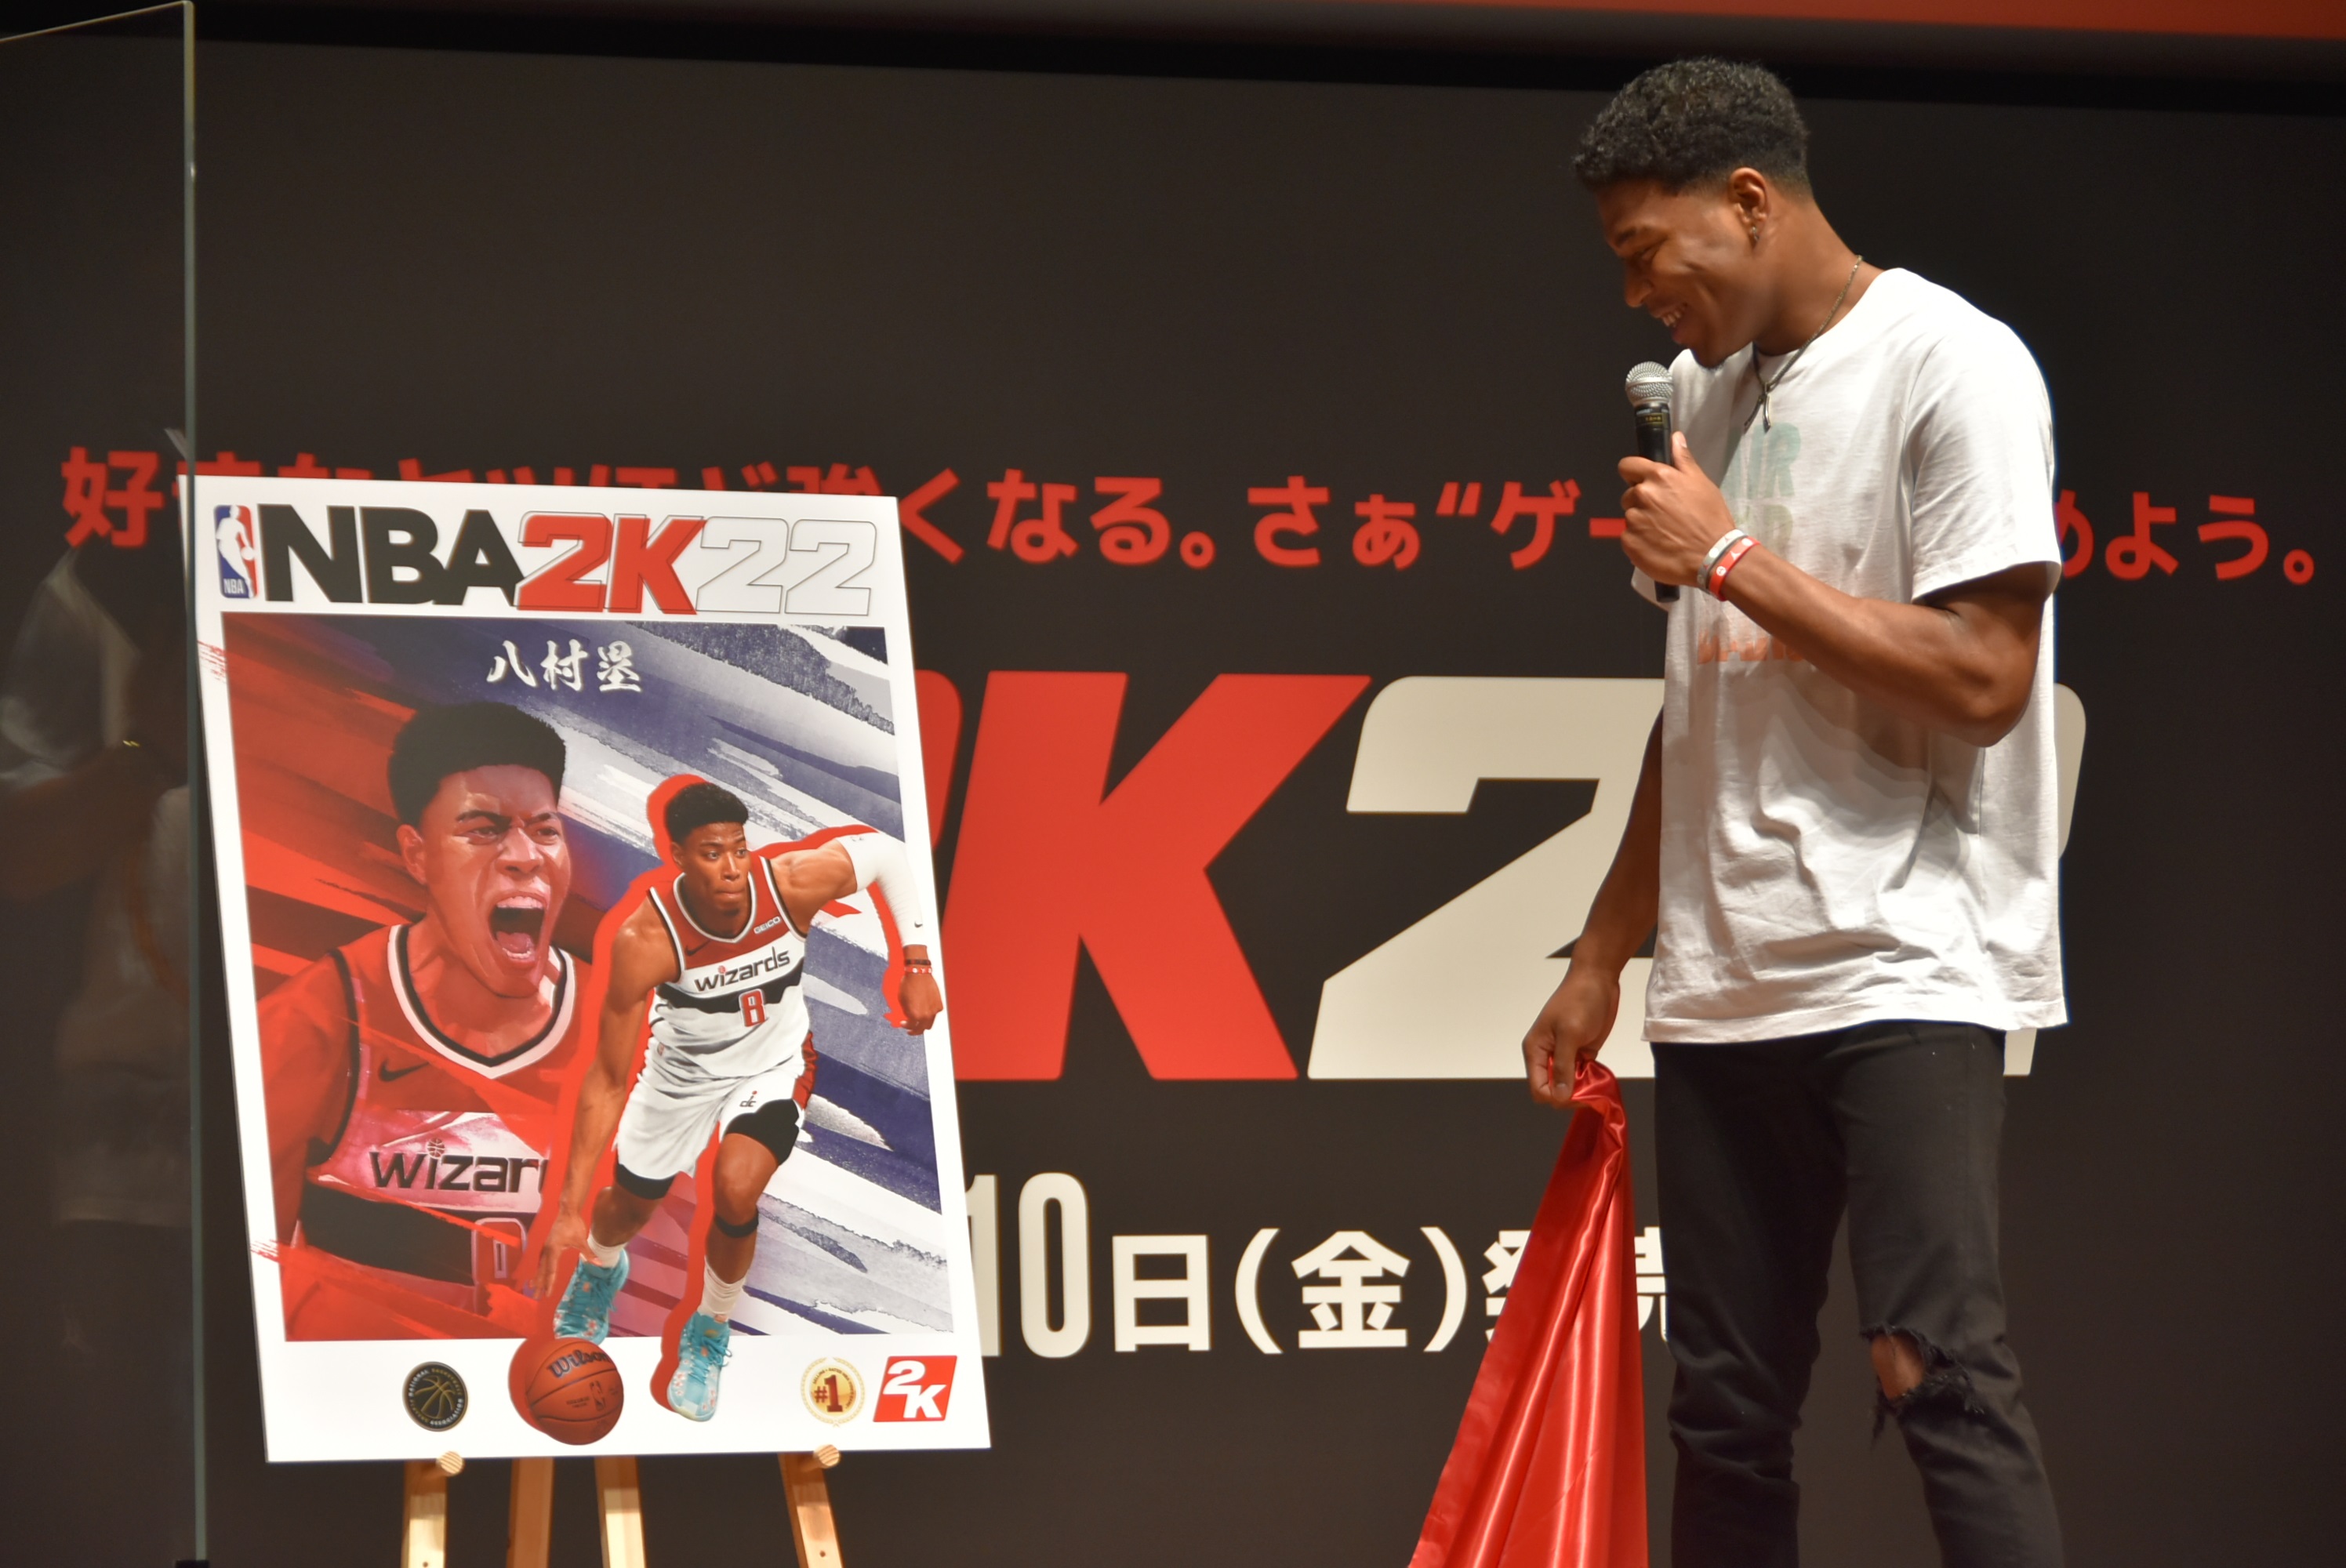 Hachimura Cover Athlete for Japanese Version of NBA 2K22